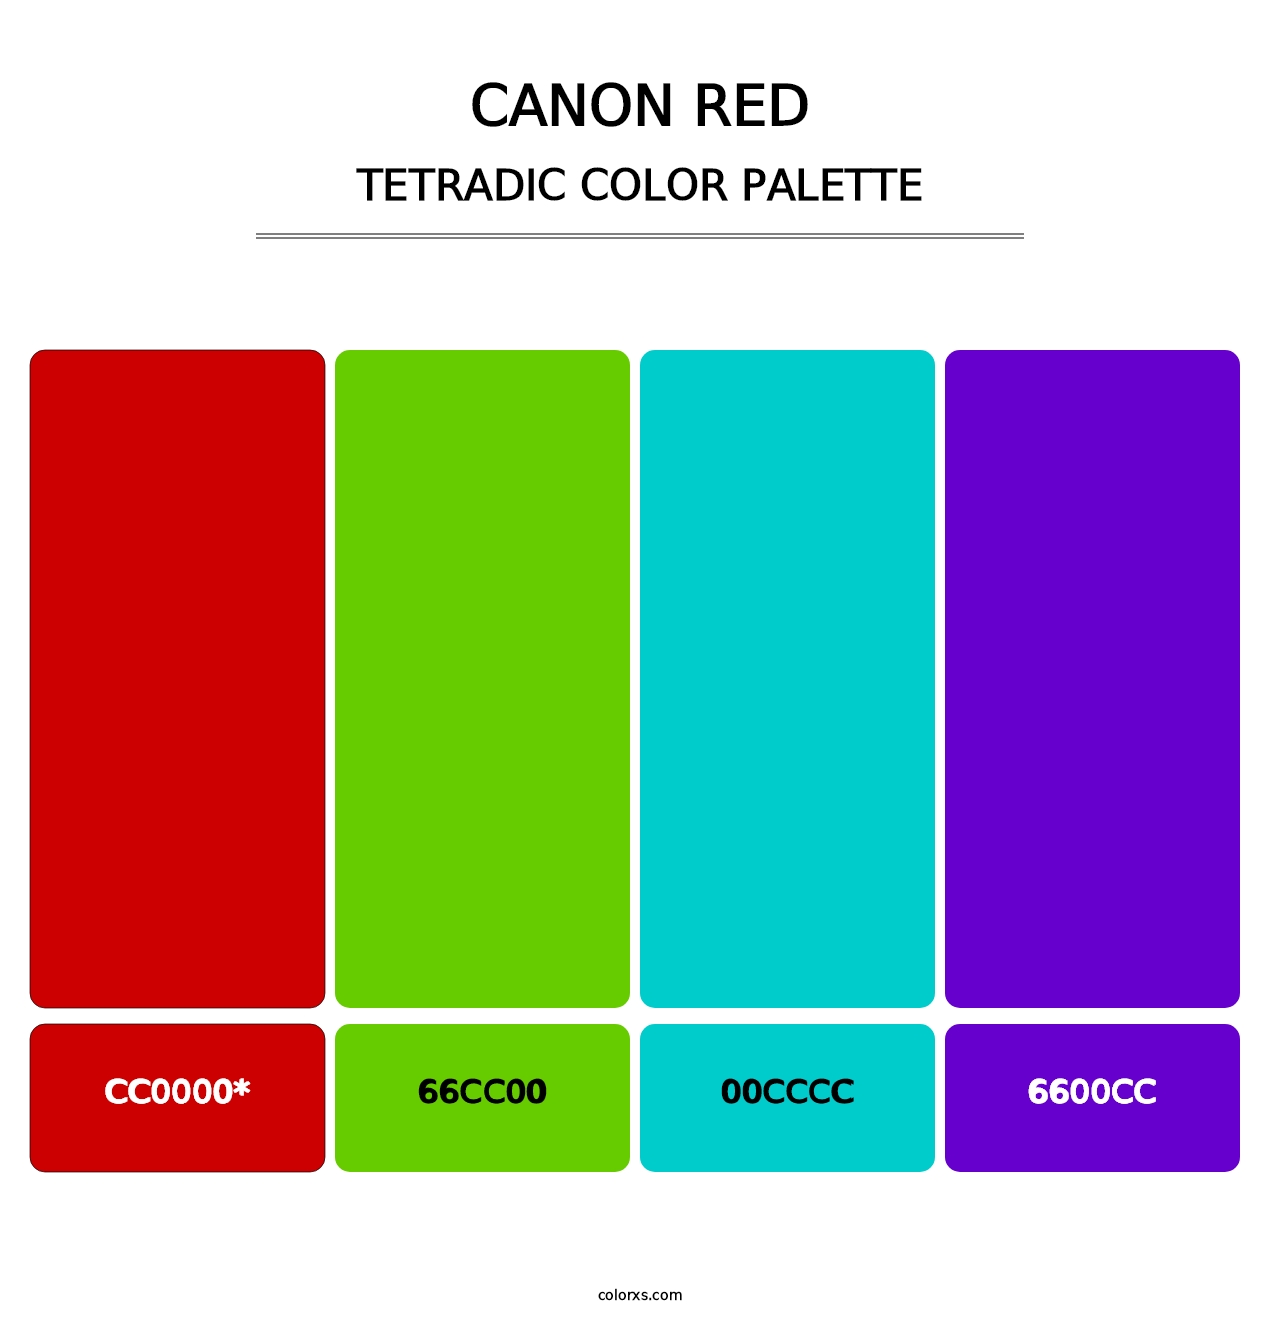 Canon Red - Tetradic Color Palette